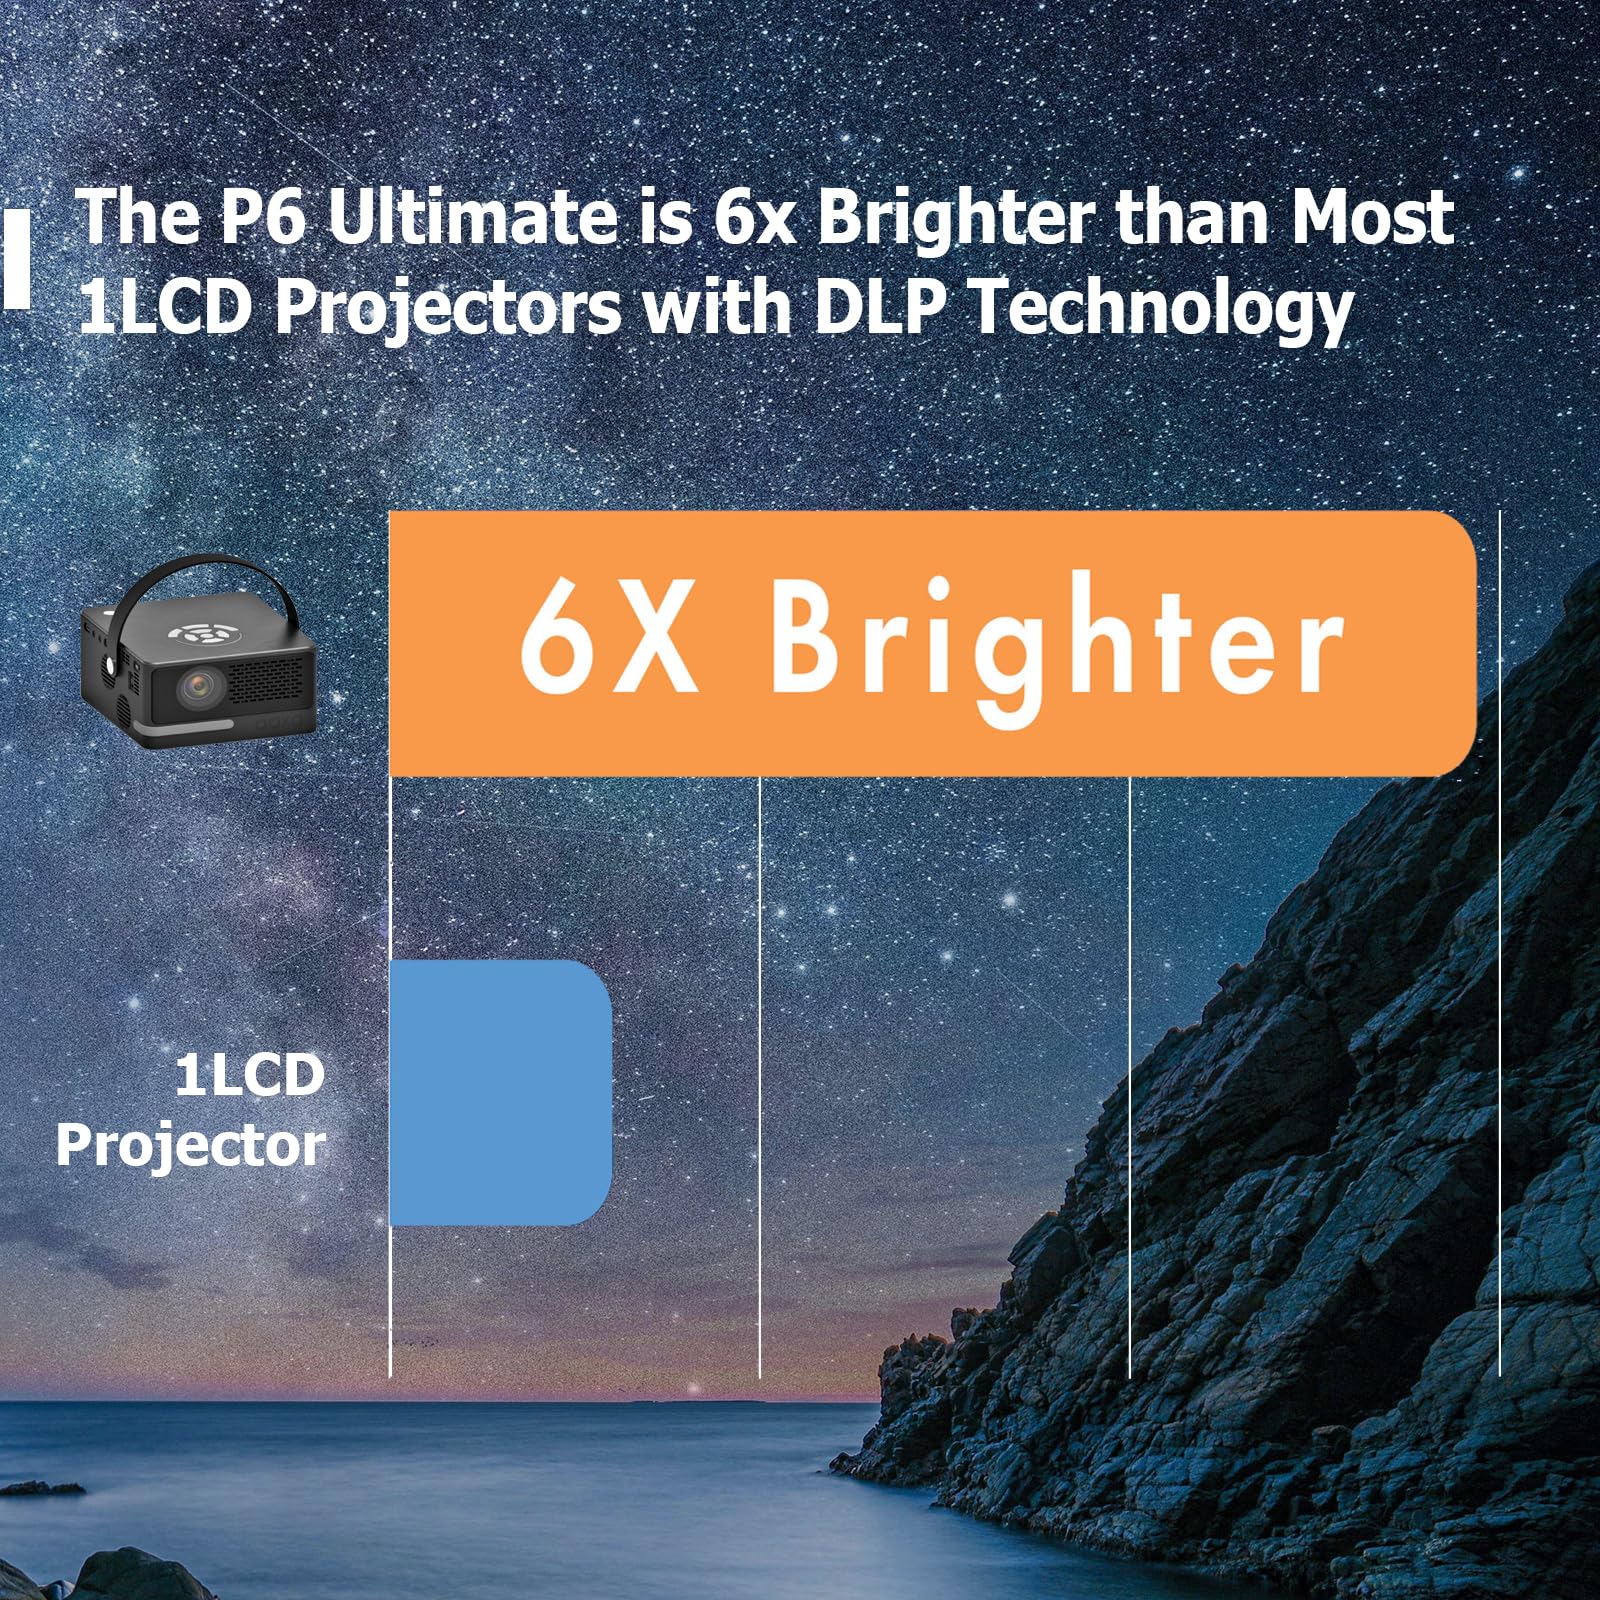 [6 Hr Battery] Worlds Brightest AAXA P6 Ultimate 1100 LED Lumens Smart Projector, 20000mah, WiFi BT Speaker, Android, Mirroring, Mini Projector, 1080p, HDMI/USB/TF Input, 3D Ready, Type C Charging